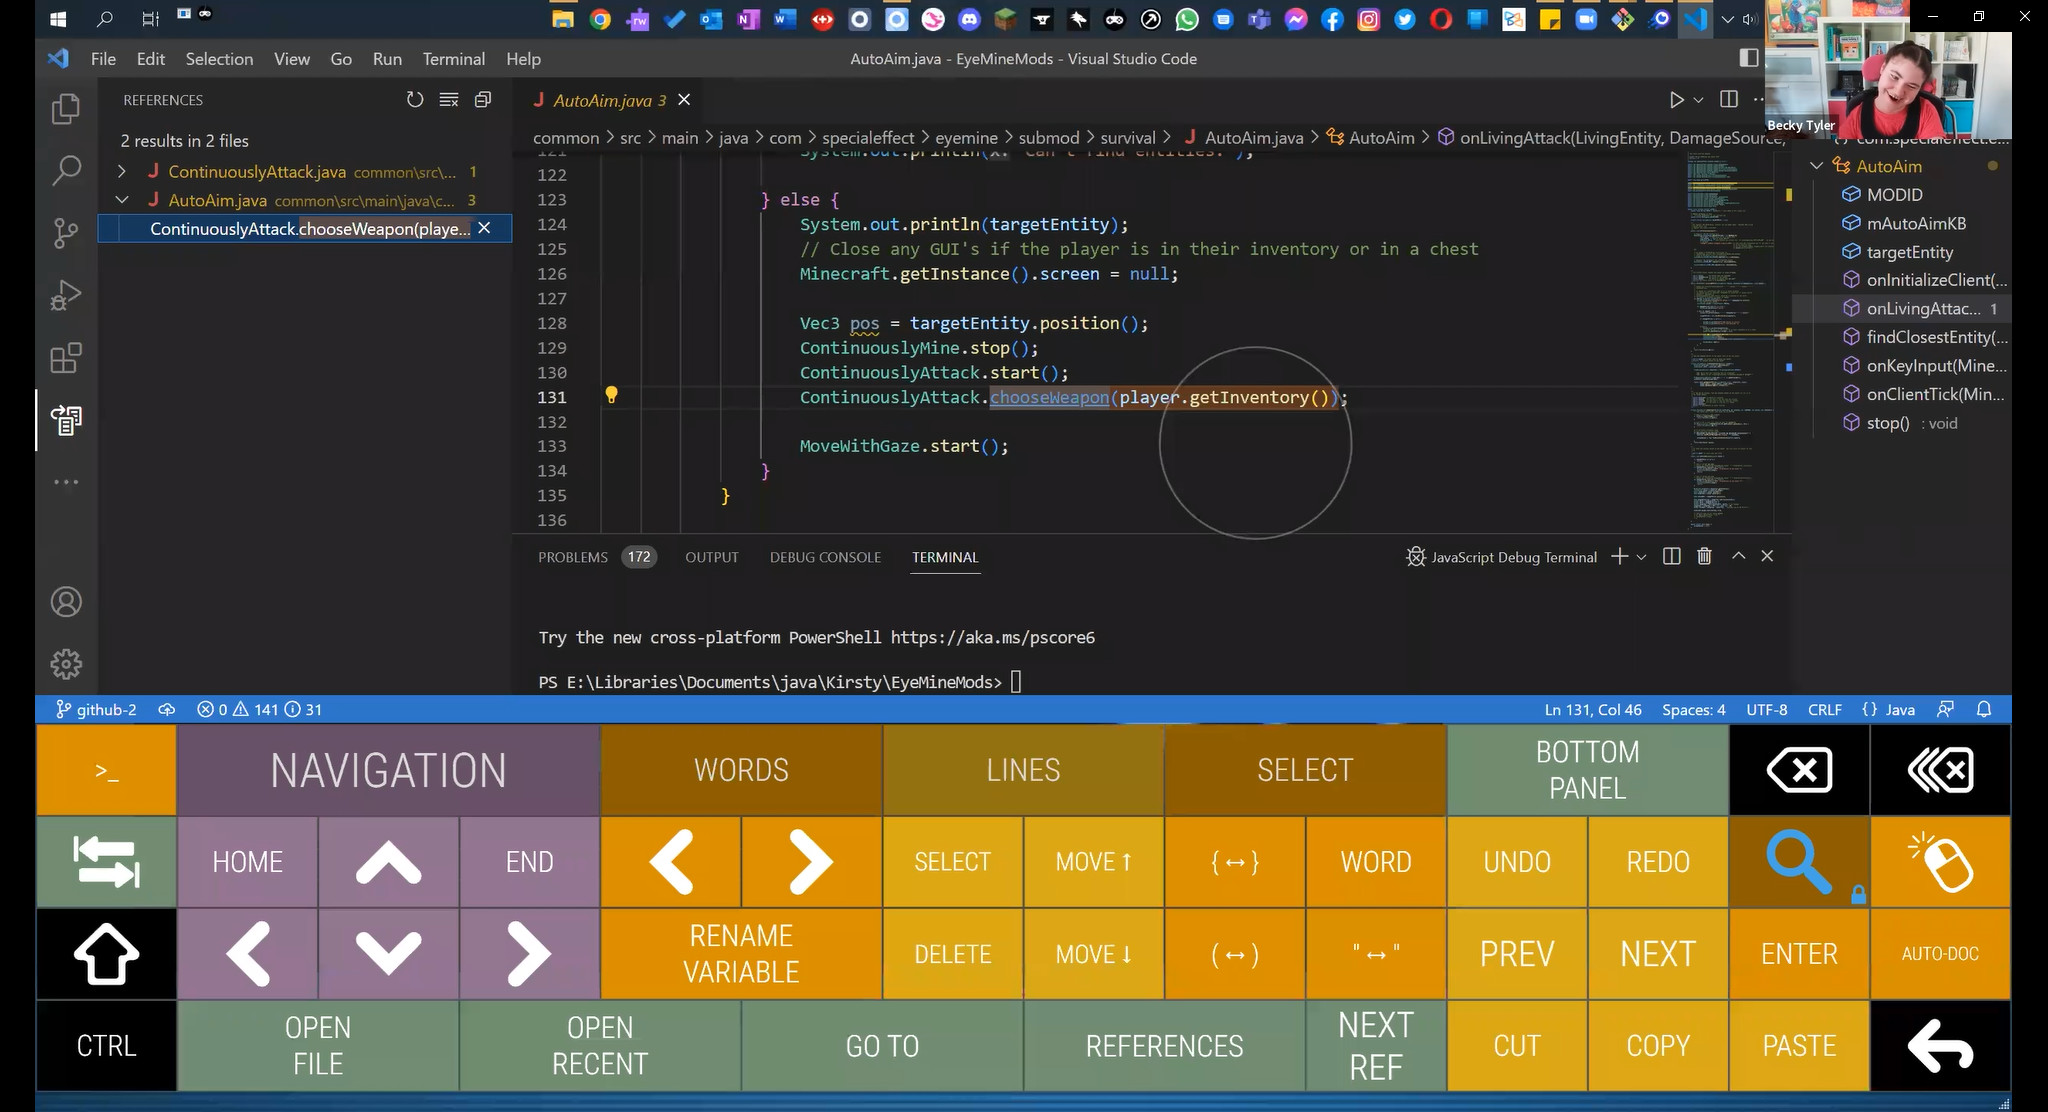 Screenshot of Optikey Coder’s custom keyboard for navigating in the Visual Studio Code IDE, with a picture-in-picture of Becky Tyler in the corner.